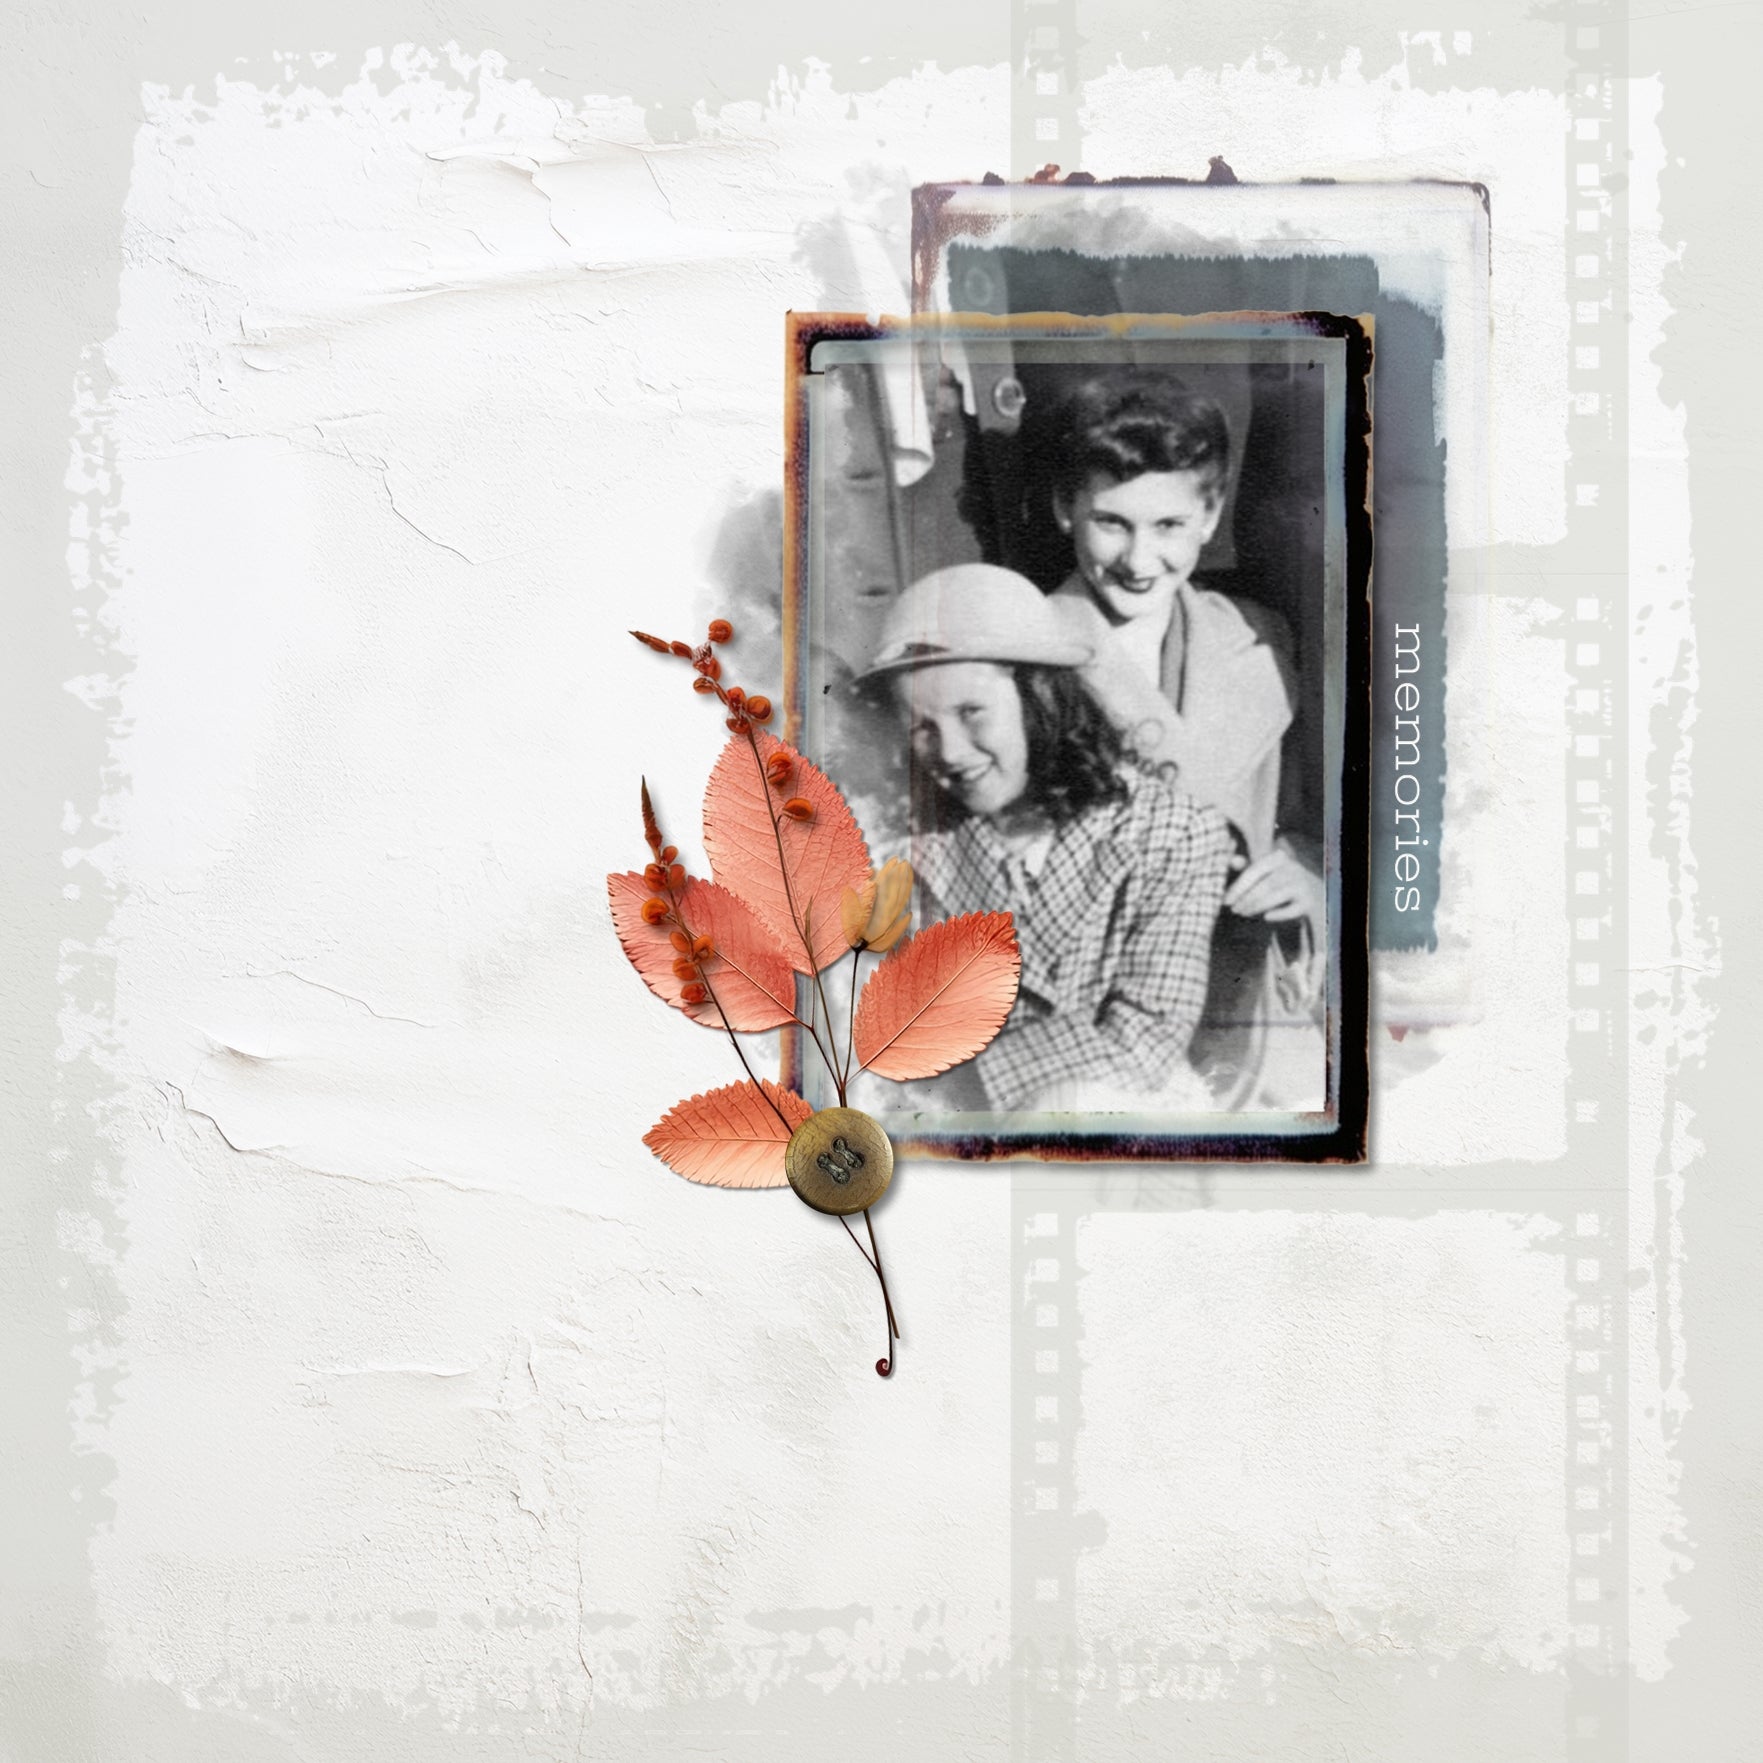 Accent your favorite photos or frame your digital scrapbook pages with these grunge overlays by Lucky Girl Creative digital art. All elements in the kit are black and easily colorized or filled with your favorite papers to fit your chosen photos. This kit is included in the Grunge Photo Transfer Mega Bundle.